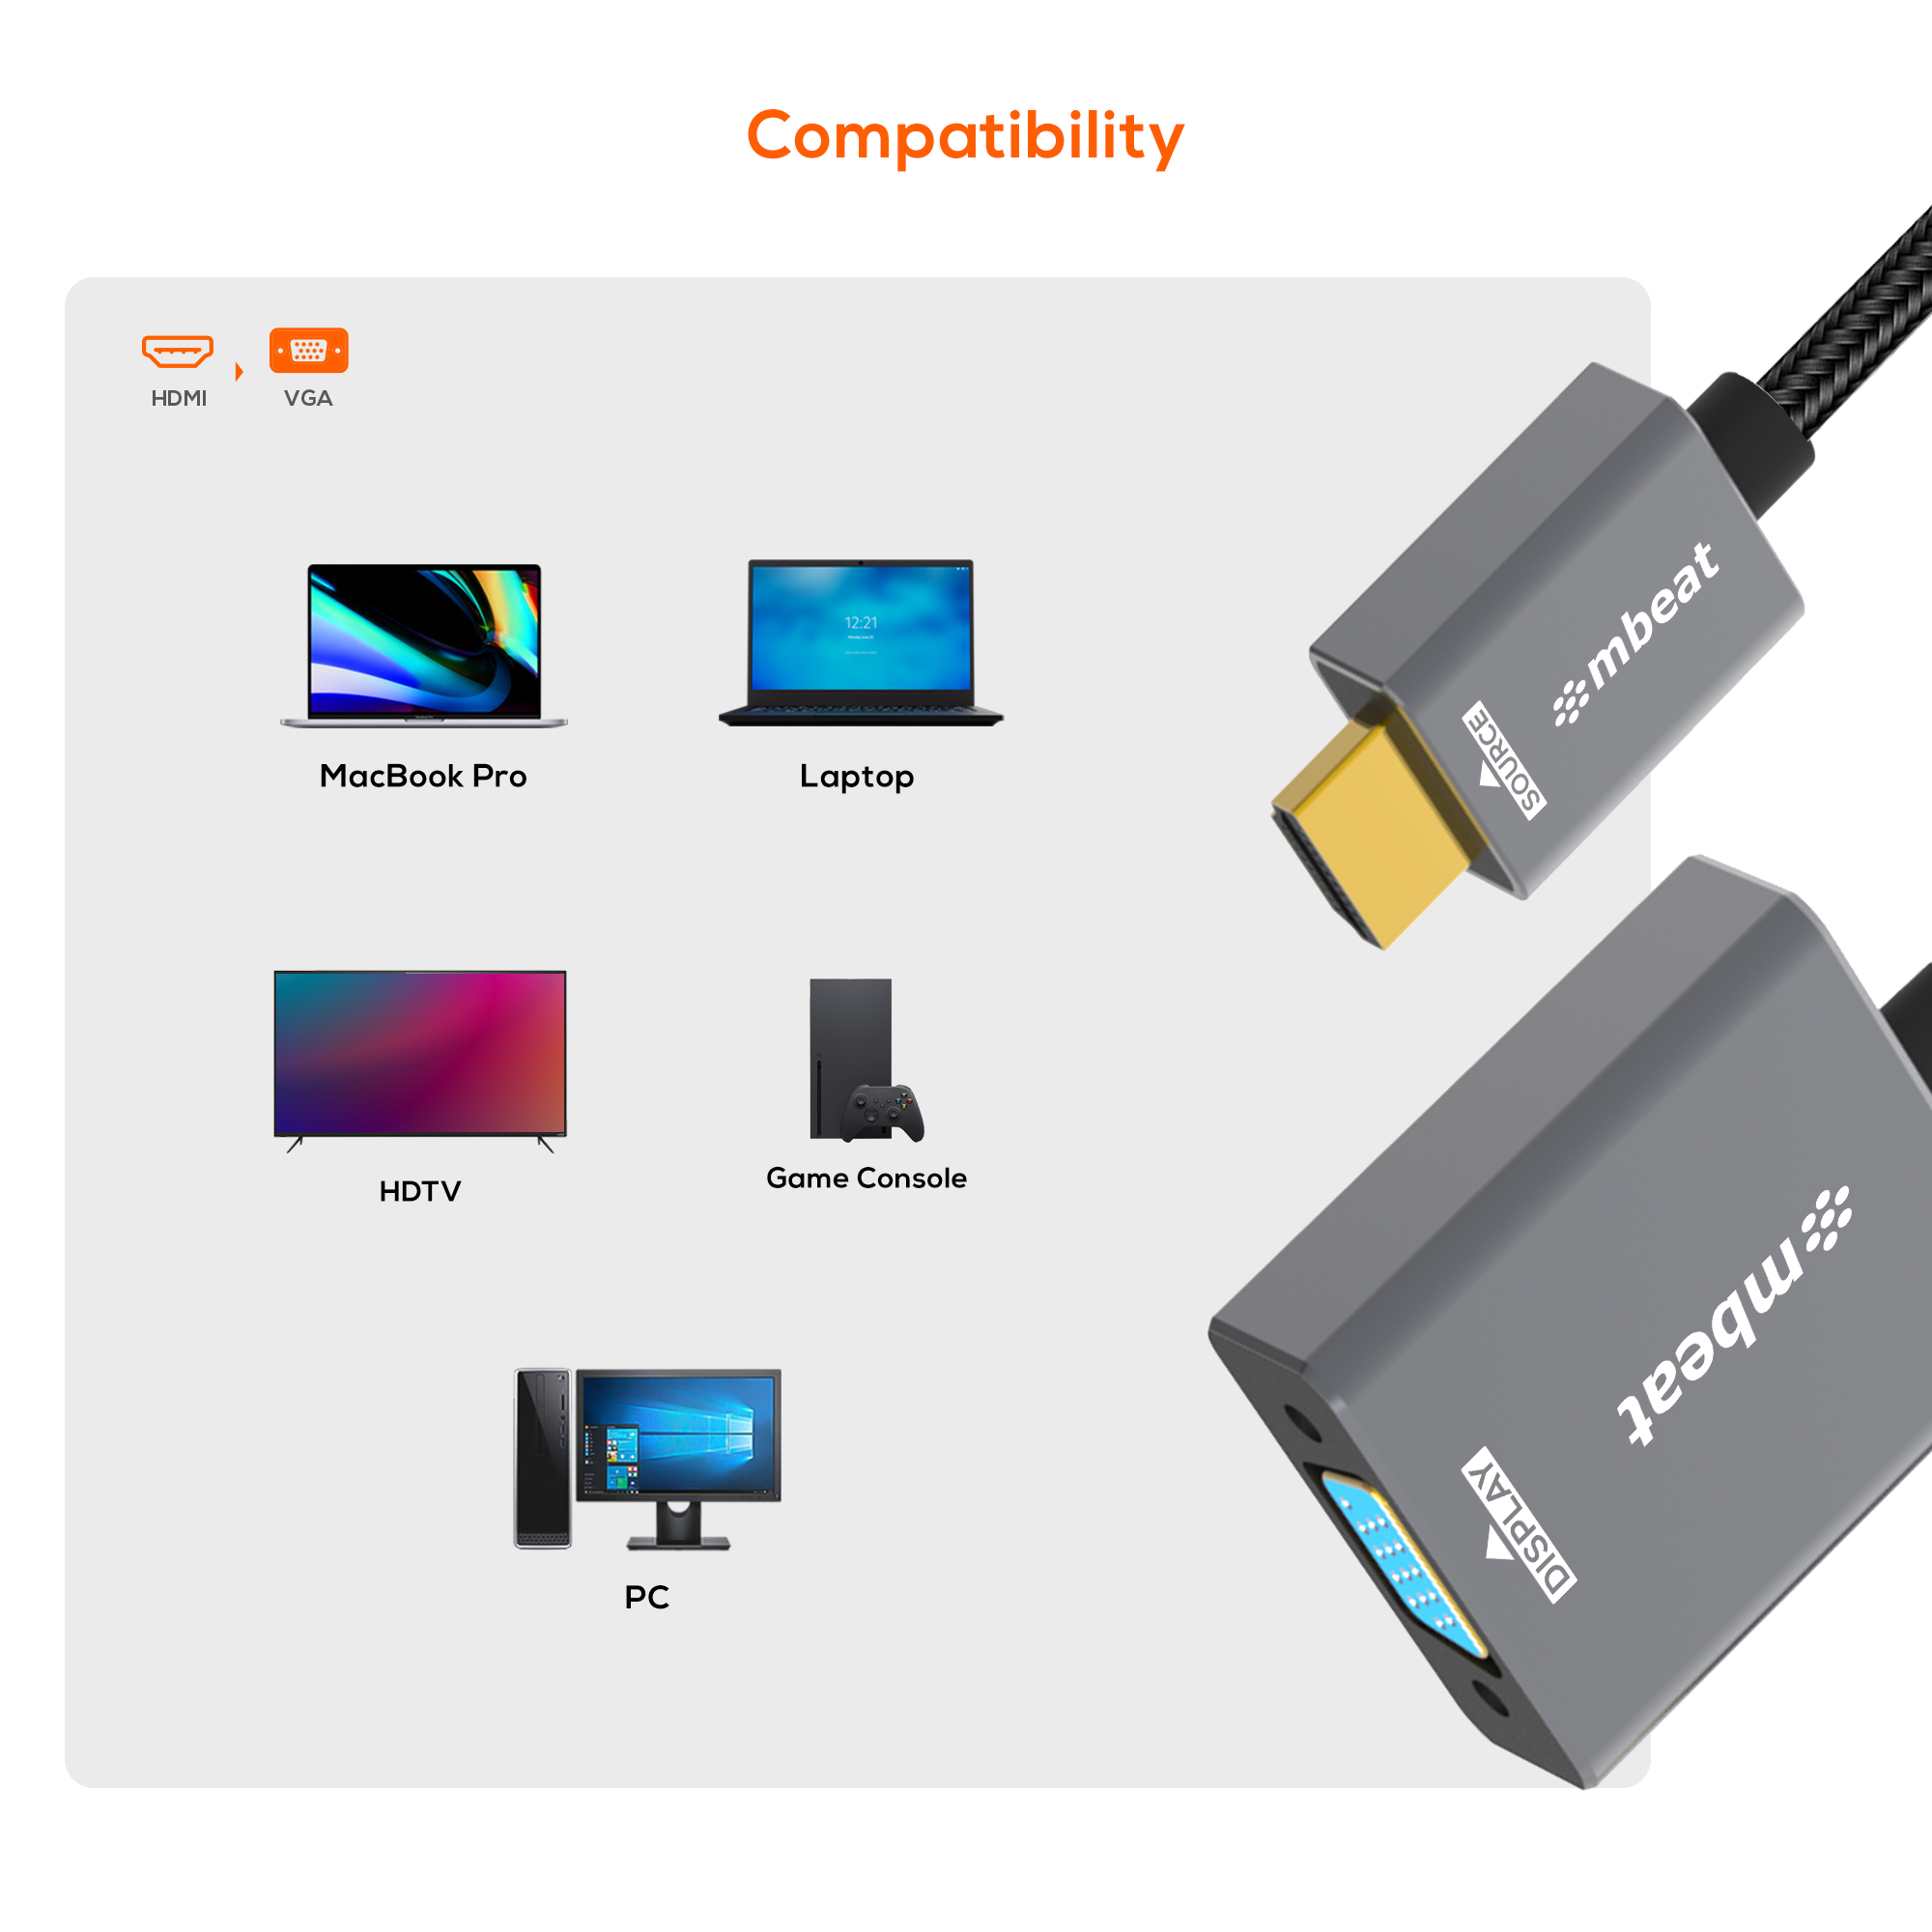 A large marketing image providing additional information about the product mbeat Tough Link HDMI to VGA Adapter - Additional alt info not provided